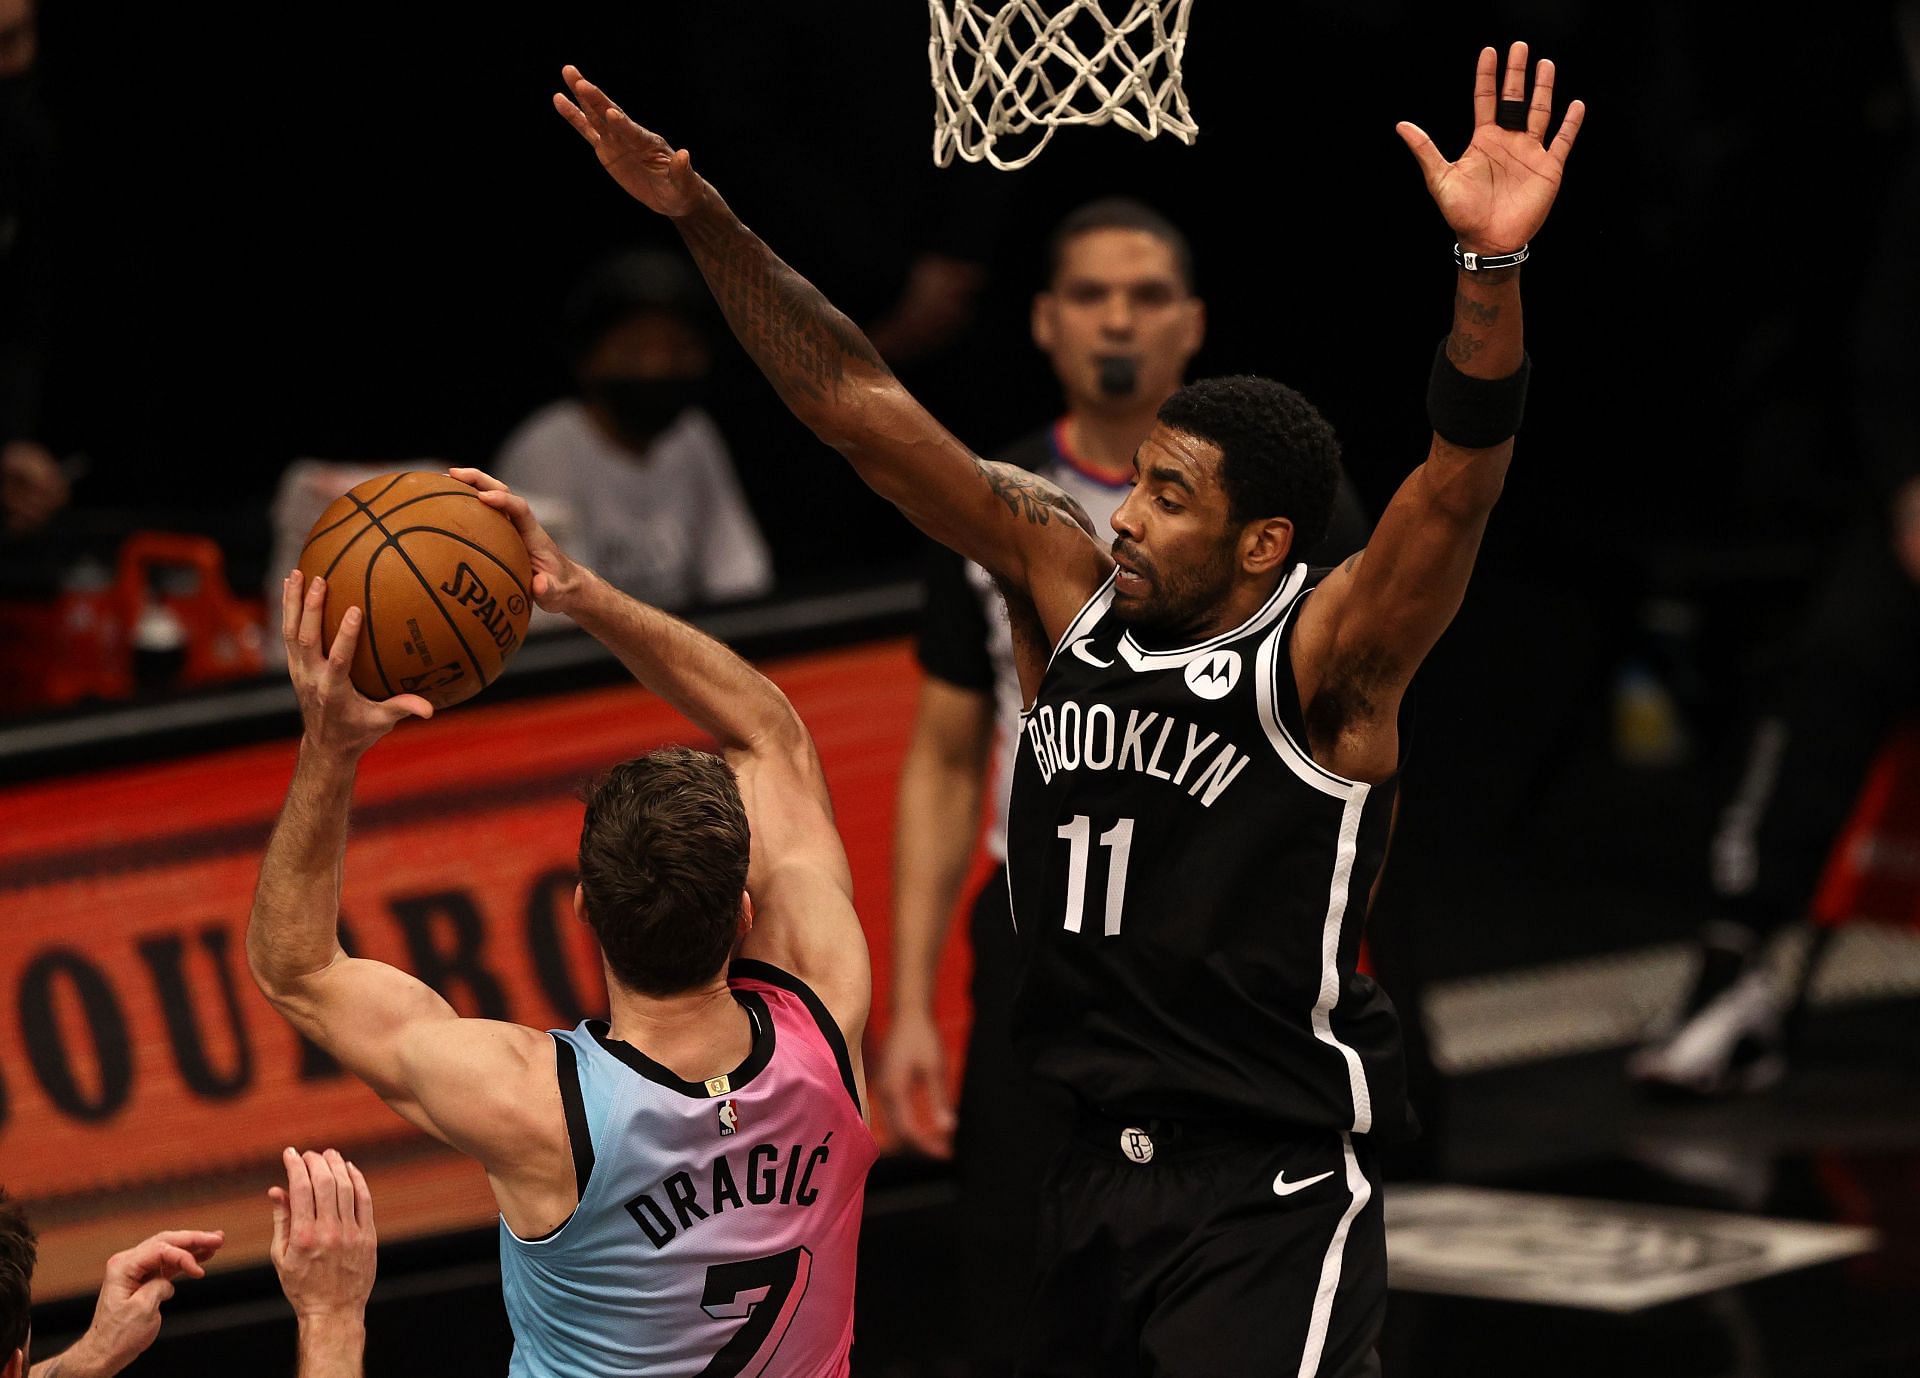 Goran Dragic (left) tries to score a layup against Kyrie Irving